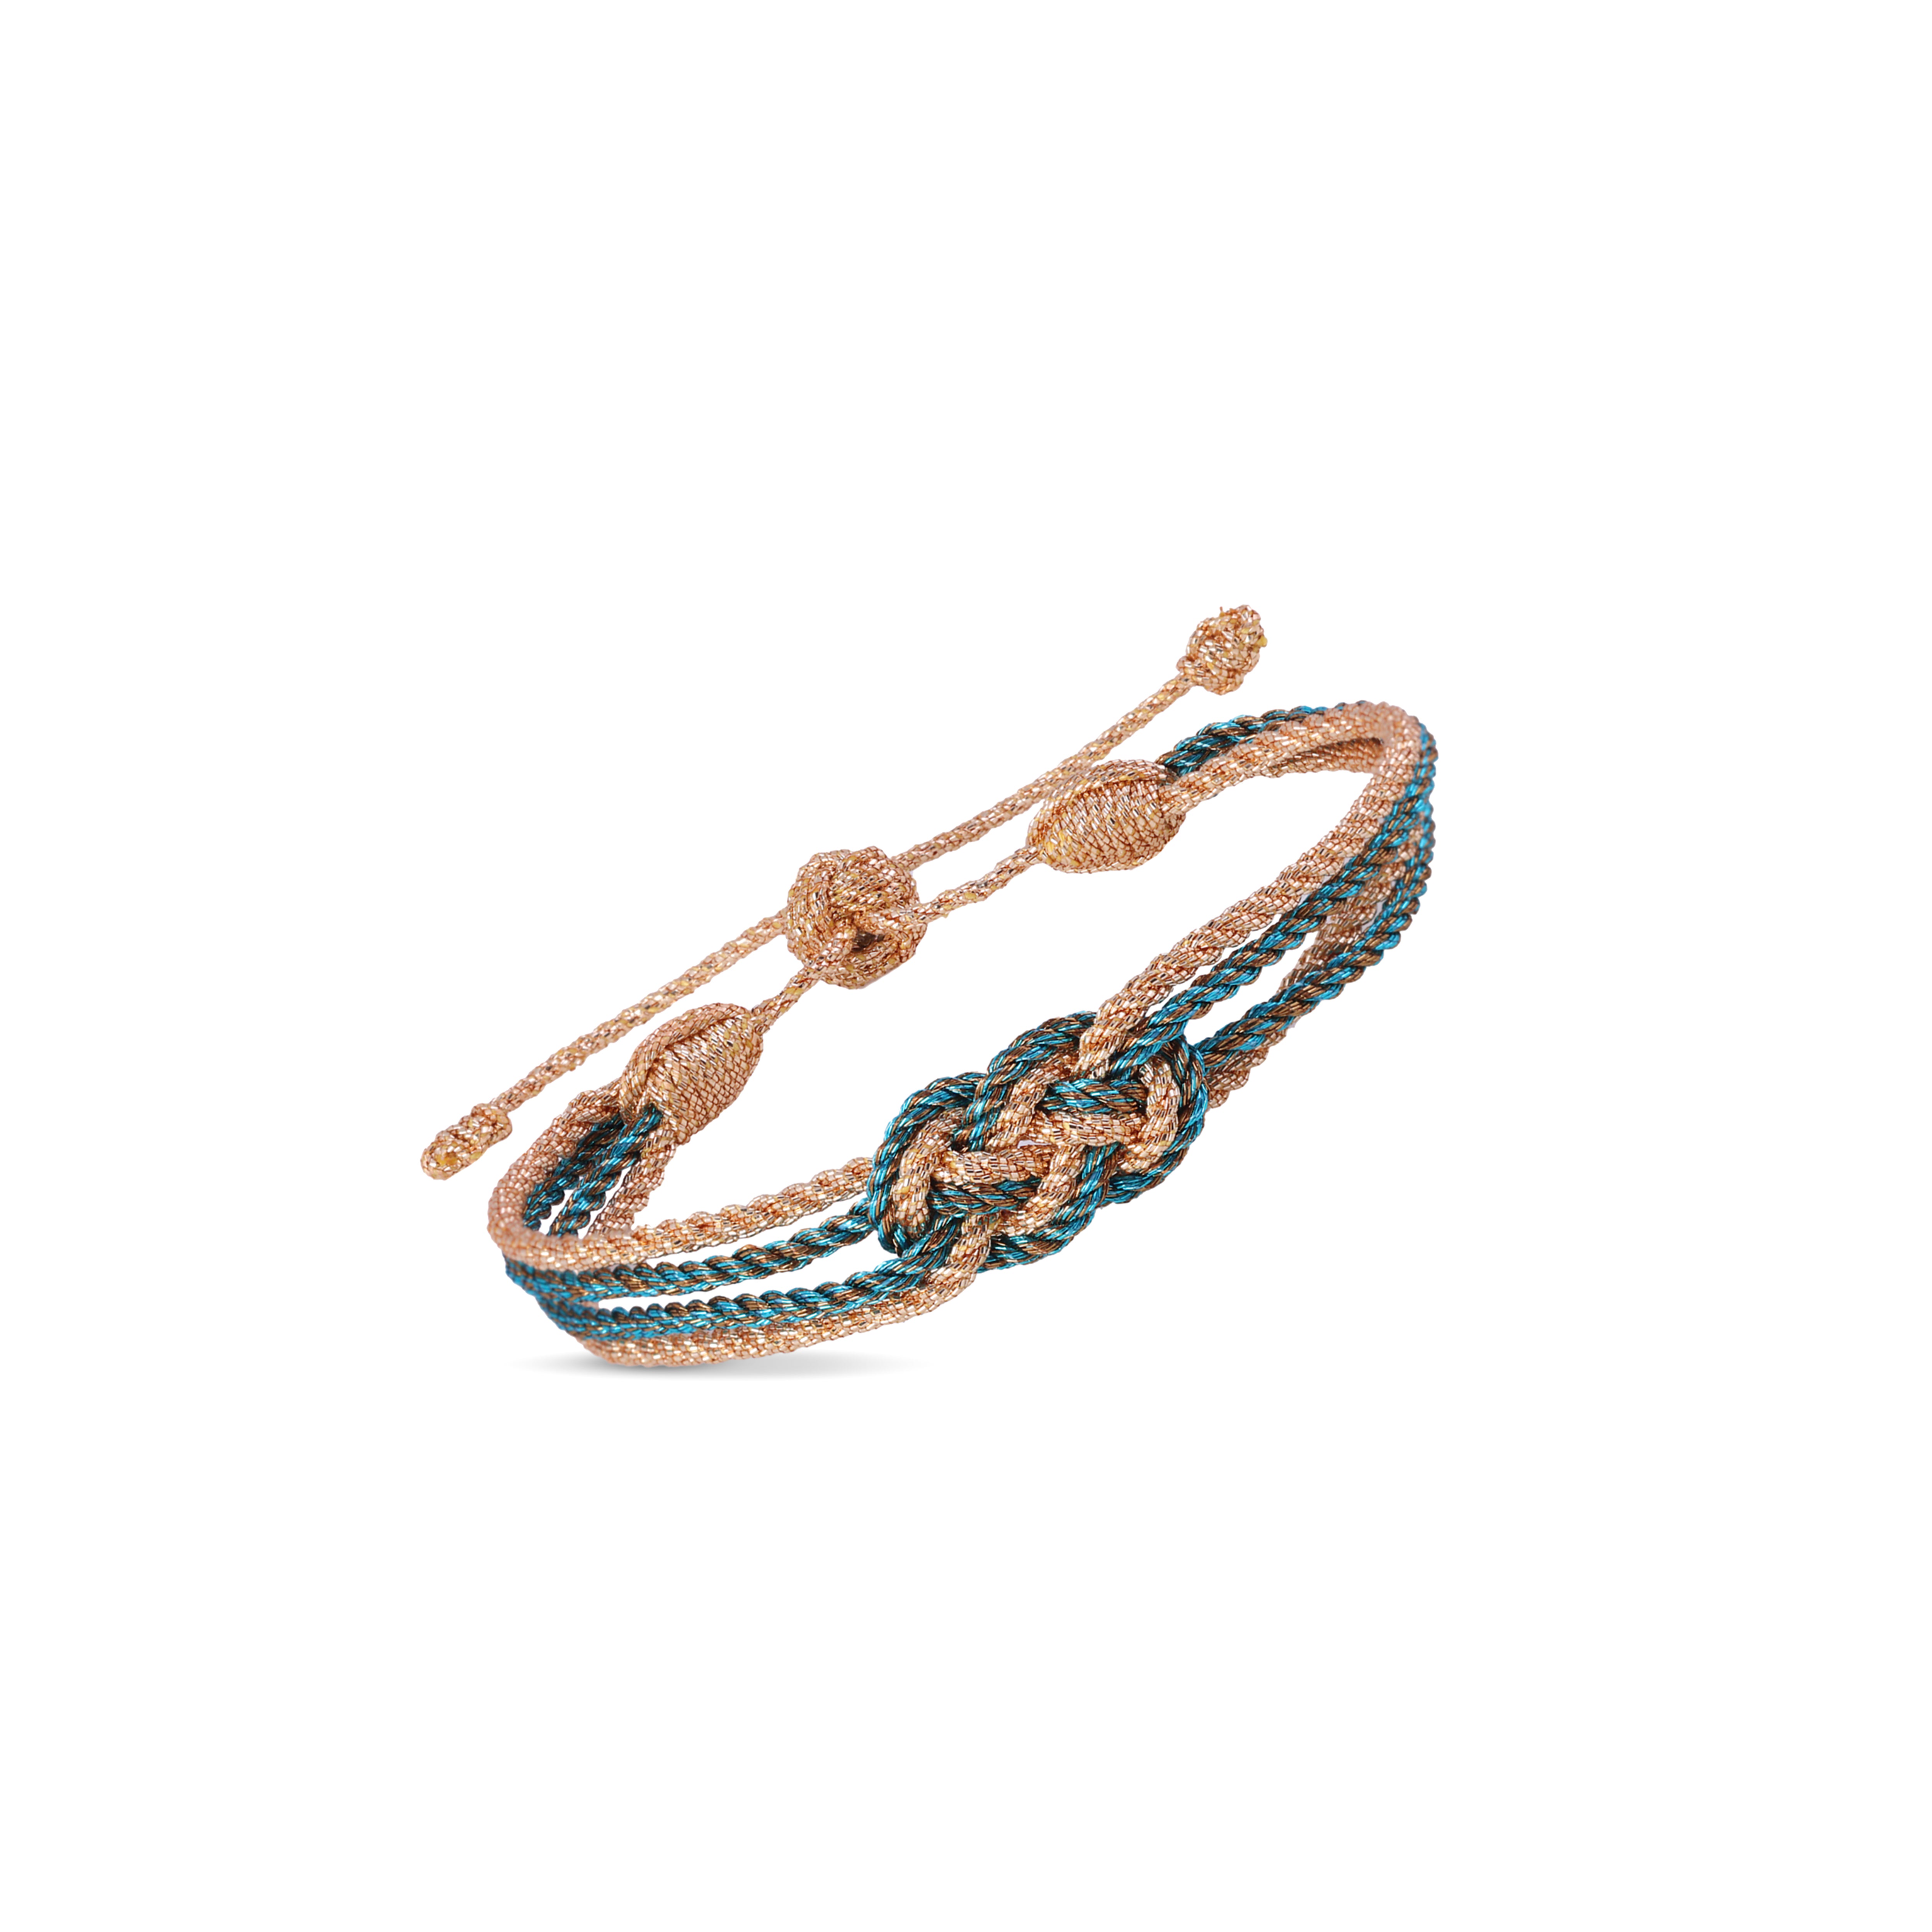 Knot n°2 Bracelet in Peach Turquoise